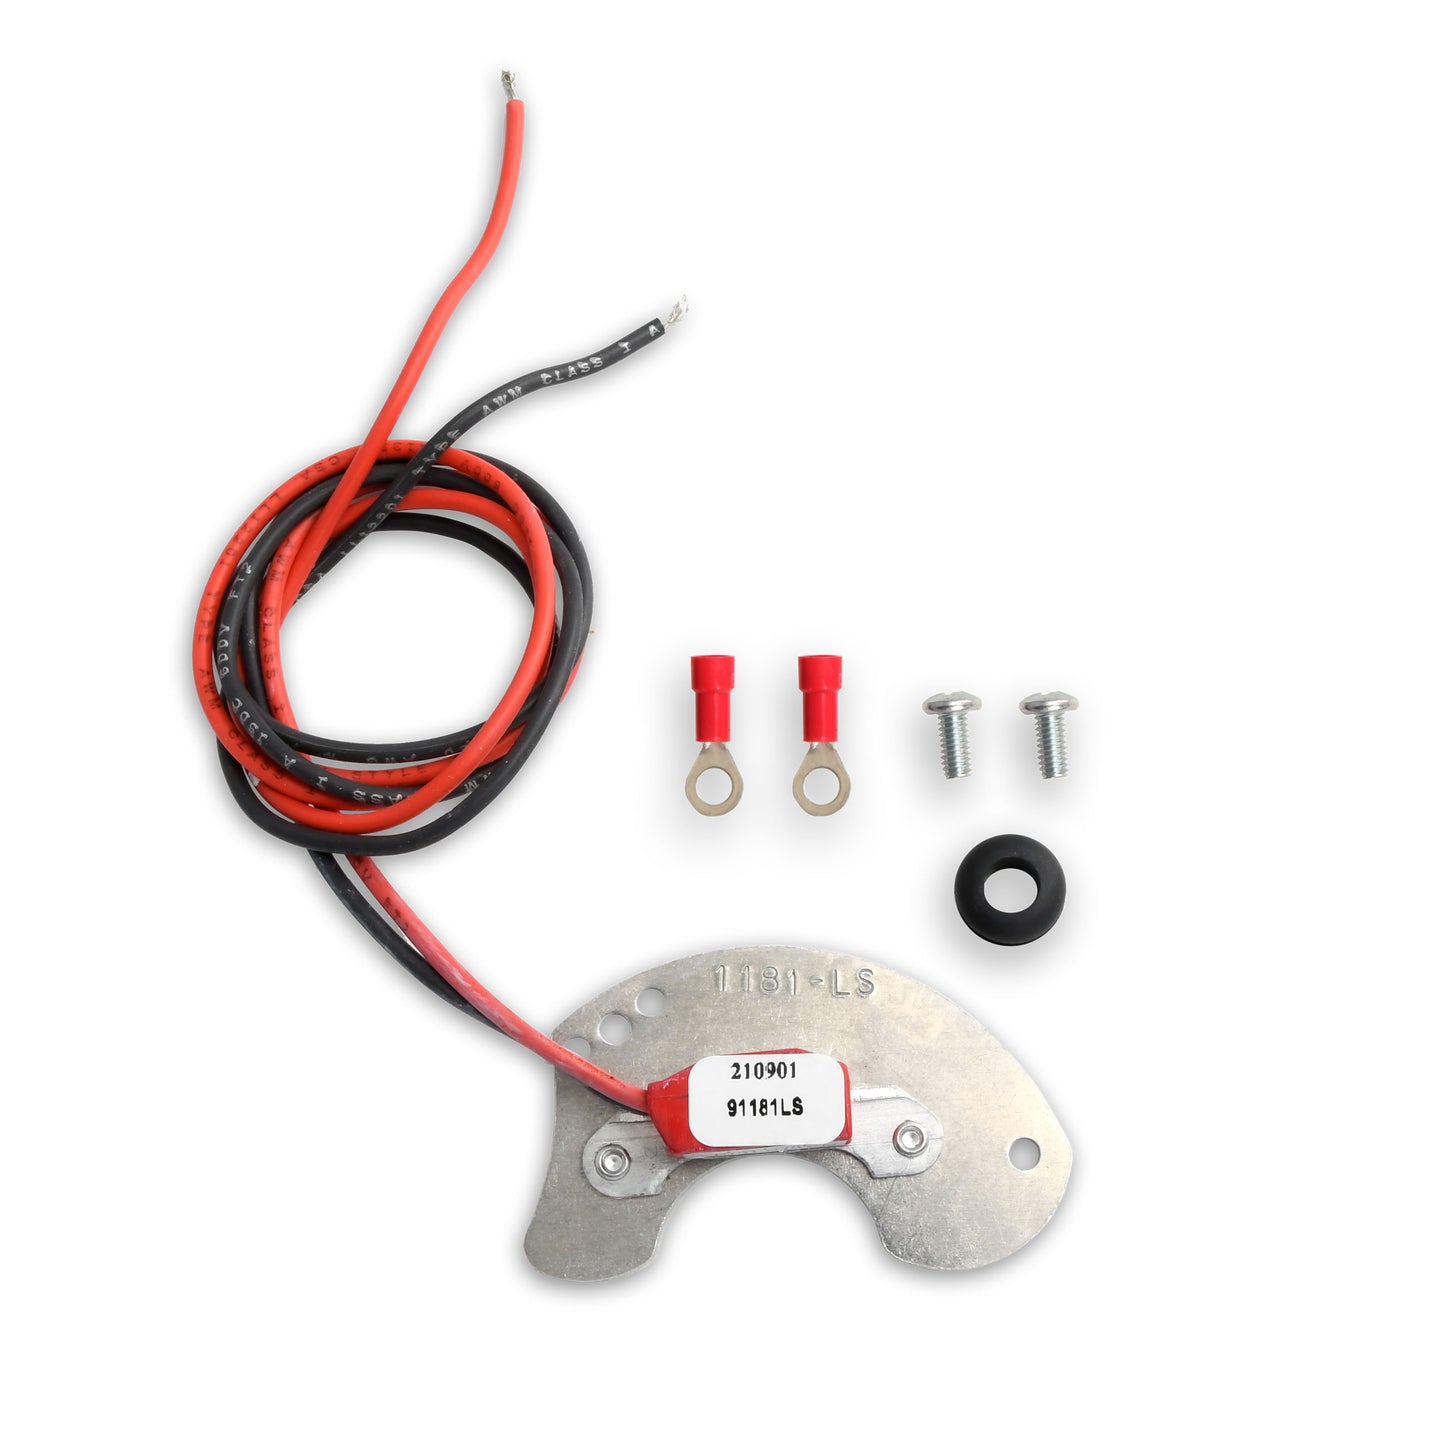 PerTronix 91181LS Ignitor® II Delco 8 cyl Electronic Ignition Conversion Kit